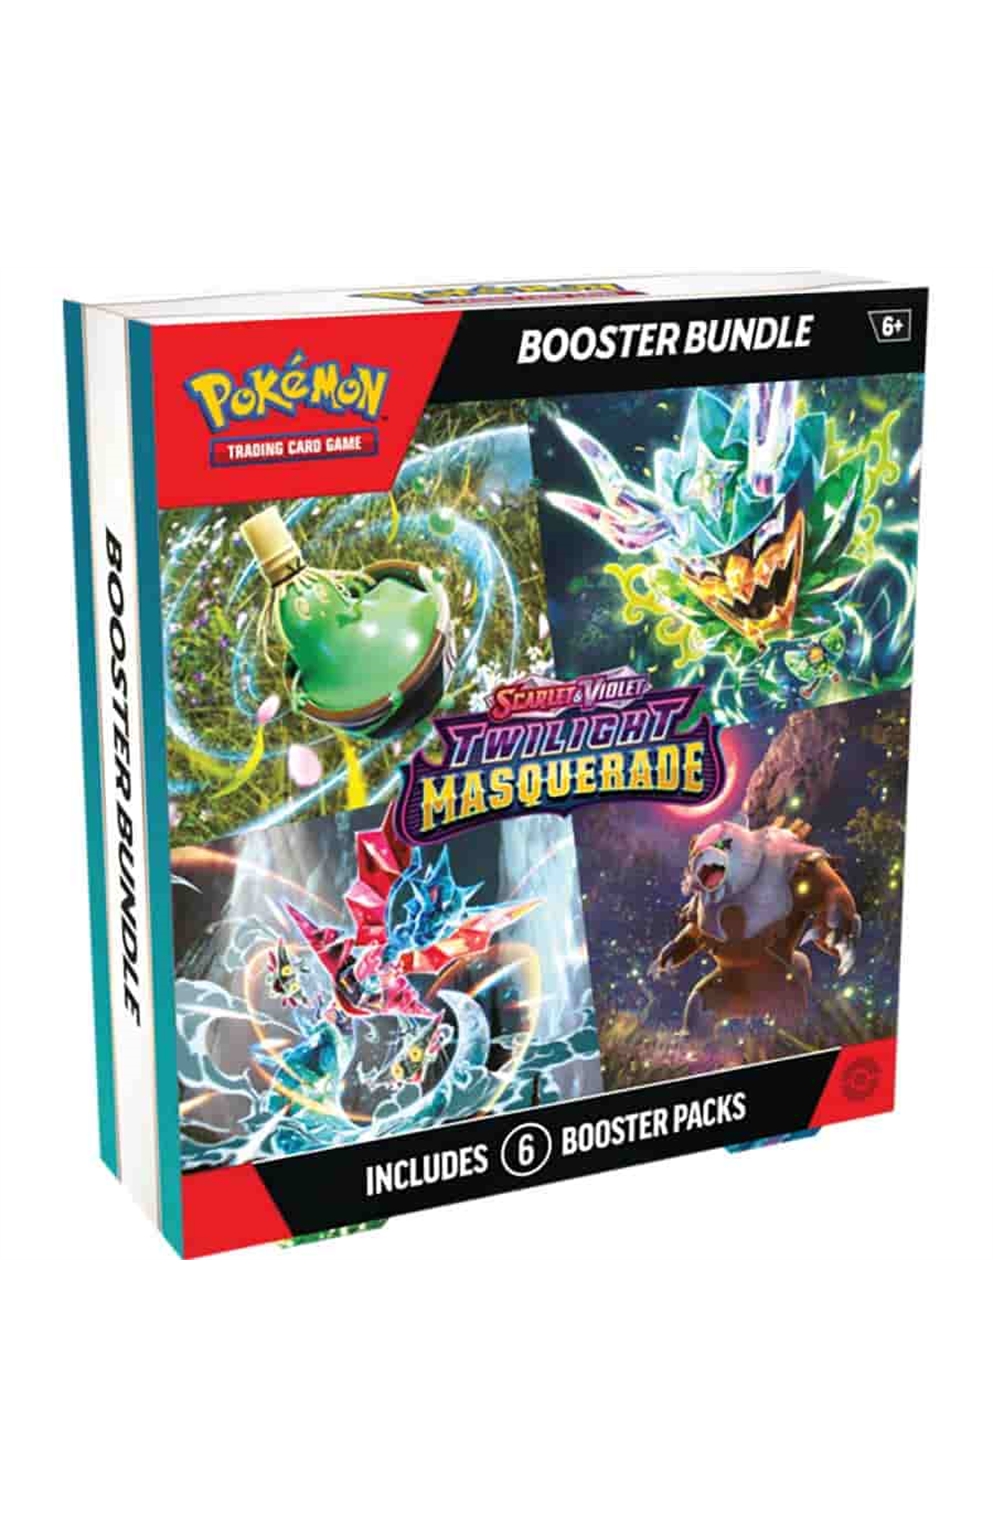 Pokemon Tcg: Scarlet And Violet Twilight Masquerade Booster Bundle (6Ct)